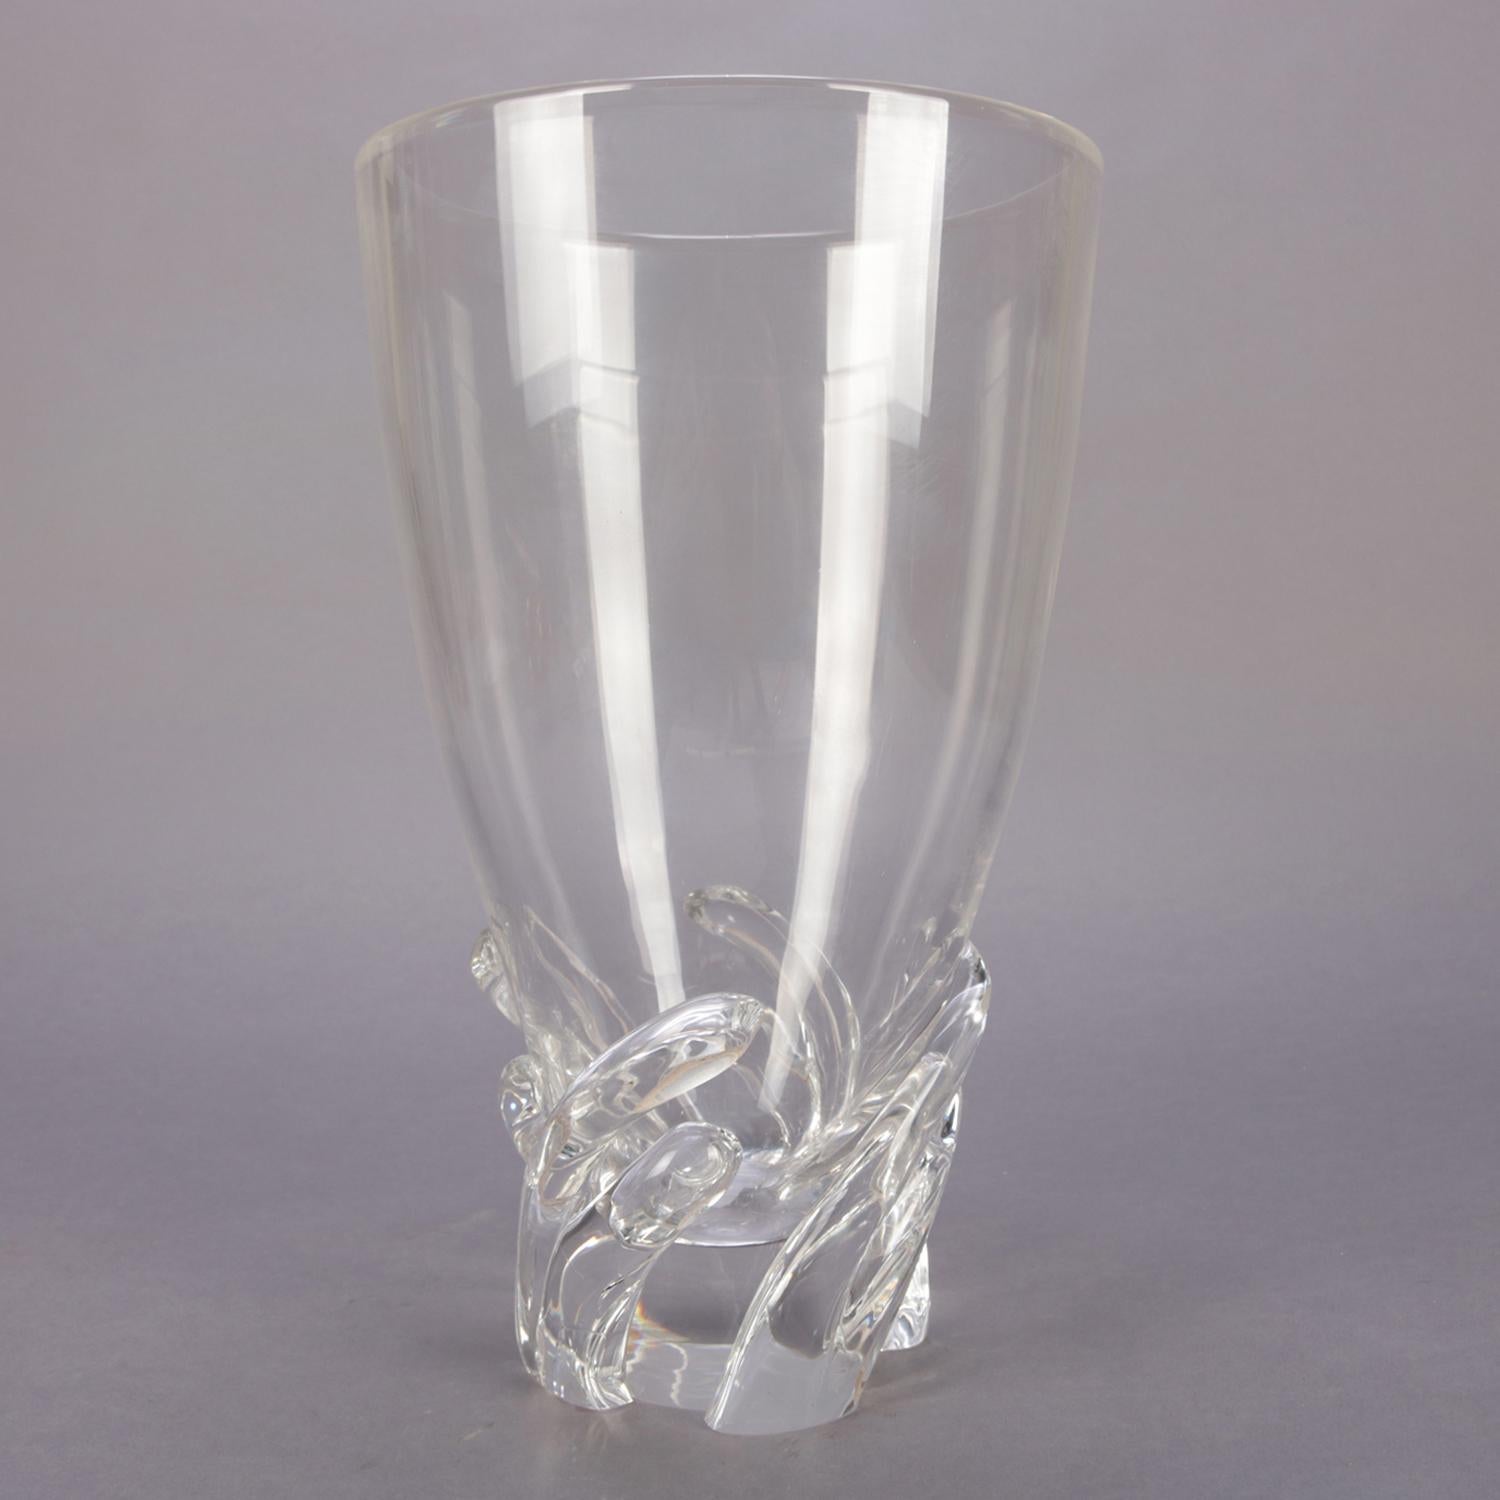 Hand-Crafted Oversized Steuben Crystal Phoenix Vase #8036, Signed, 20th Century